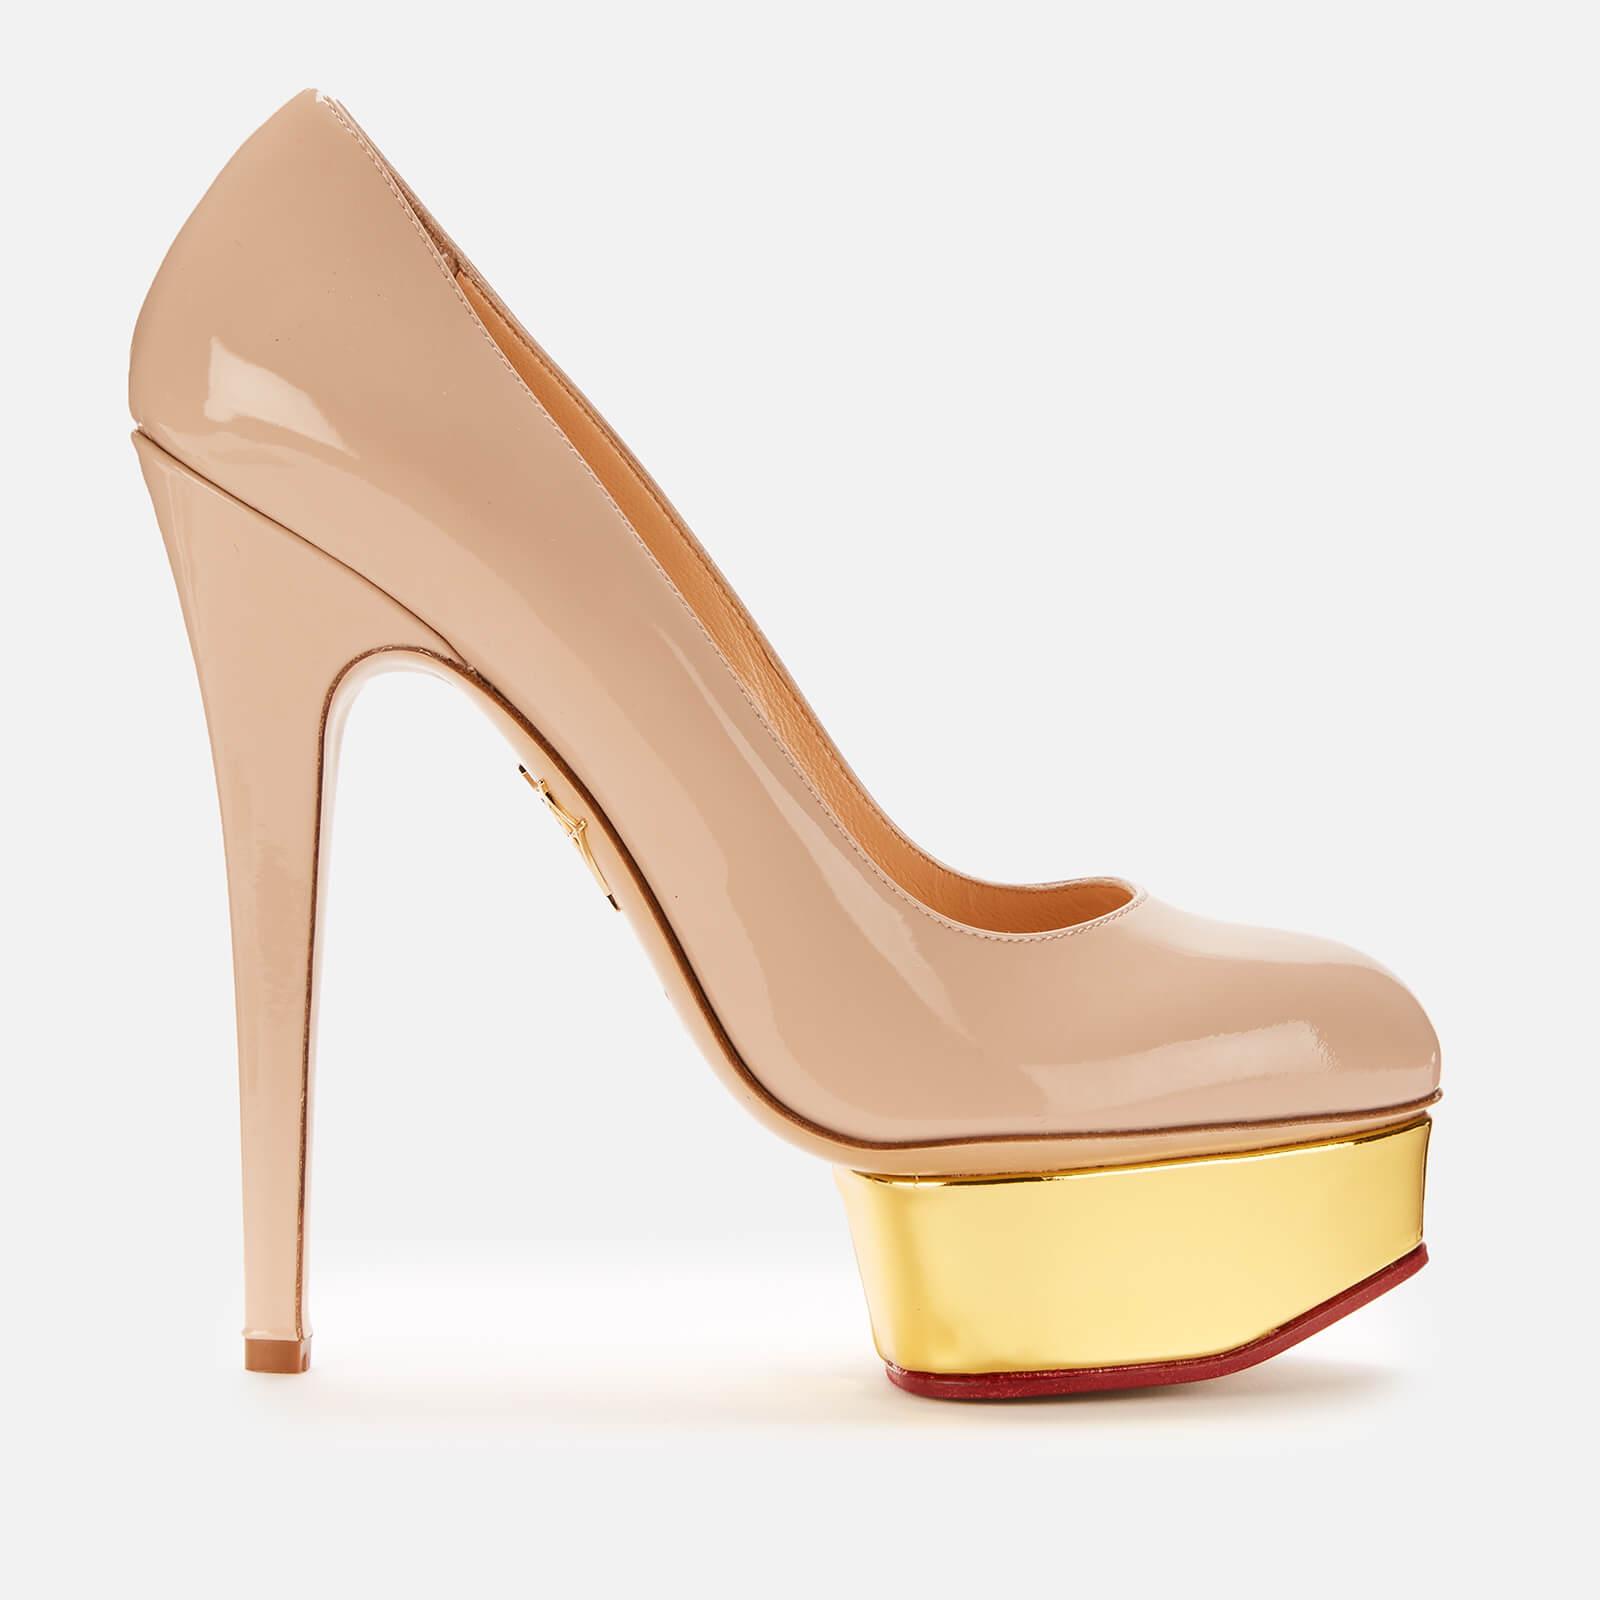 Charlotte Olympia Dolly Patent Platform Court Shoes in Pink - Lyst